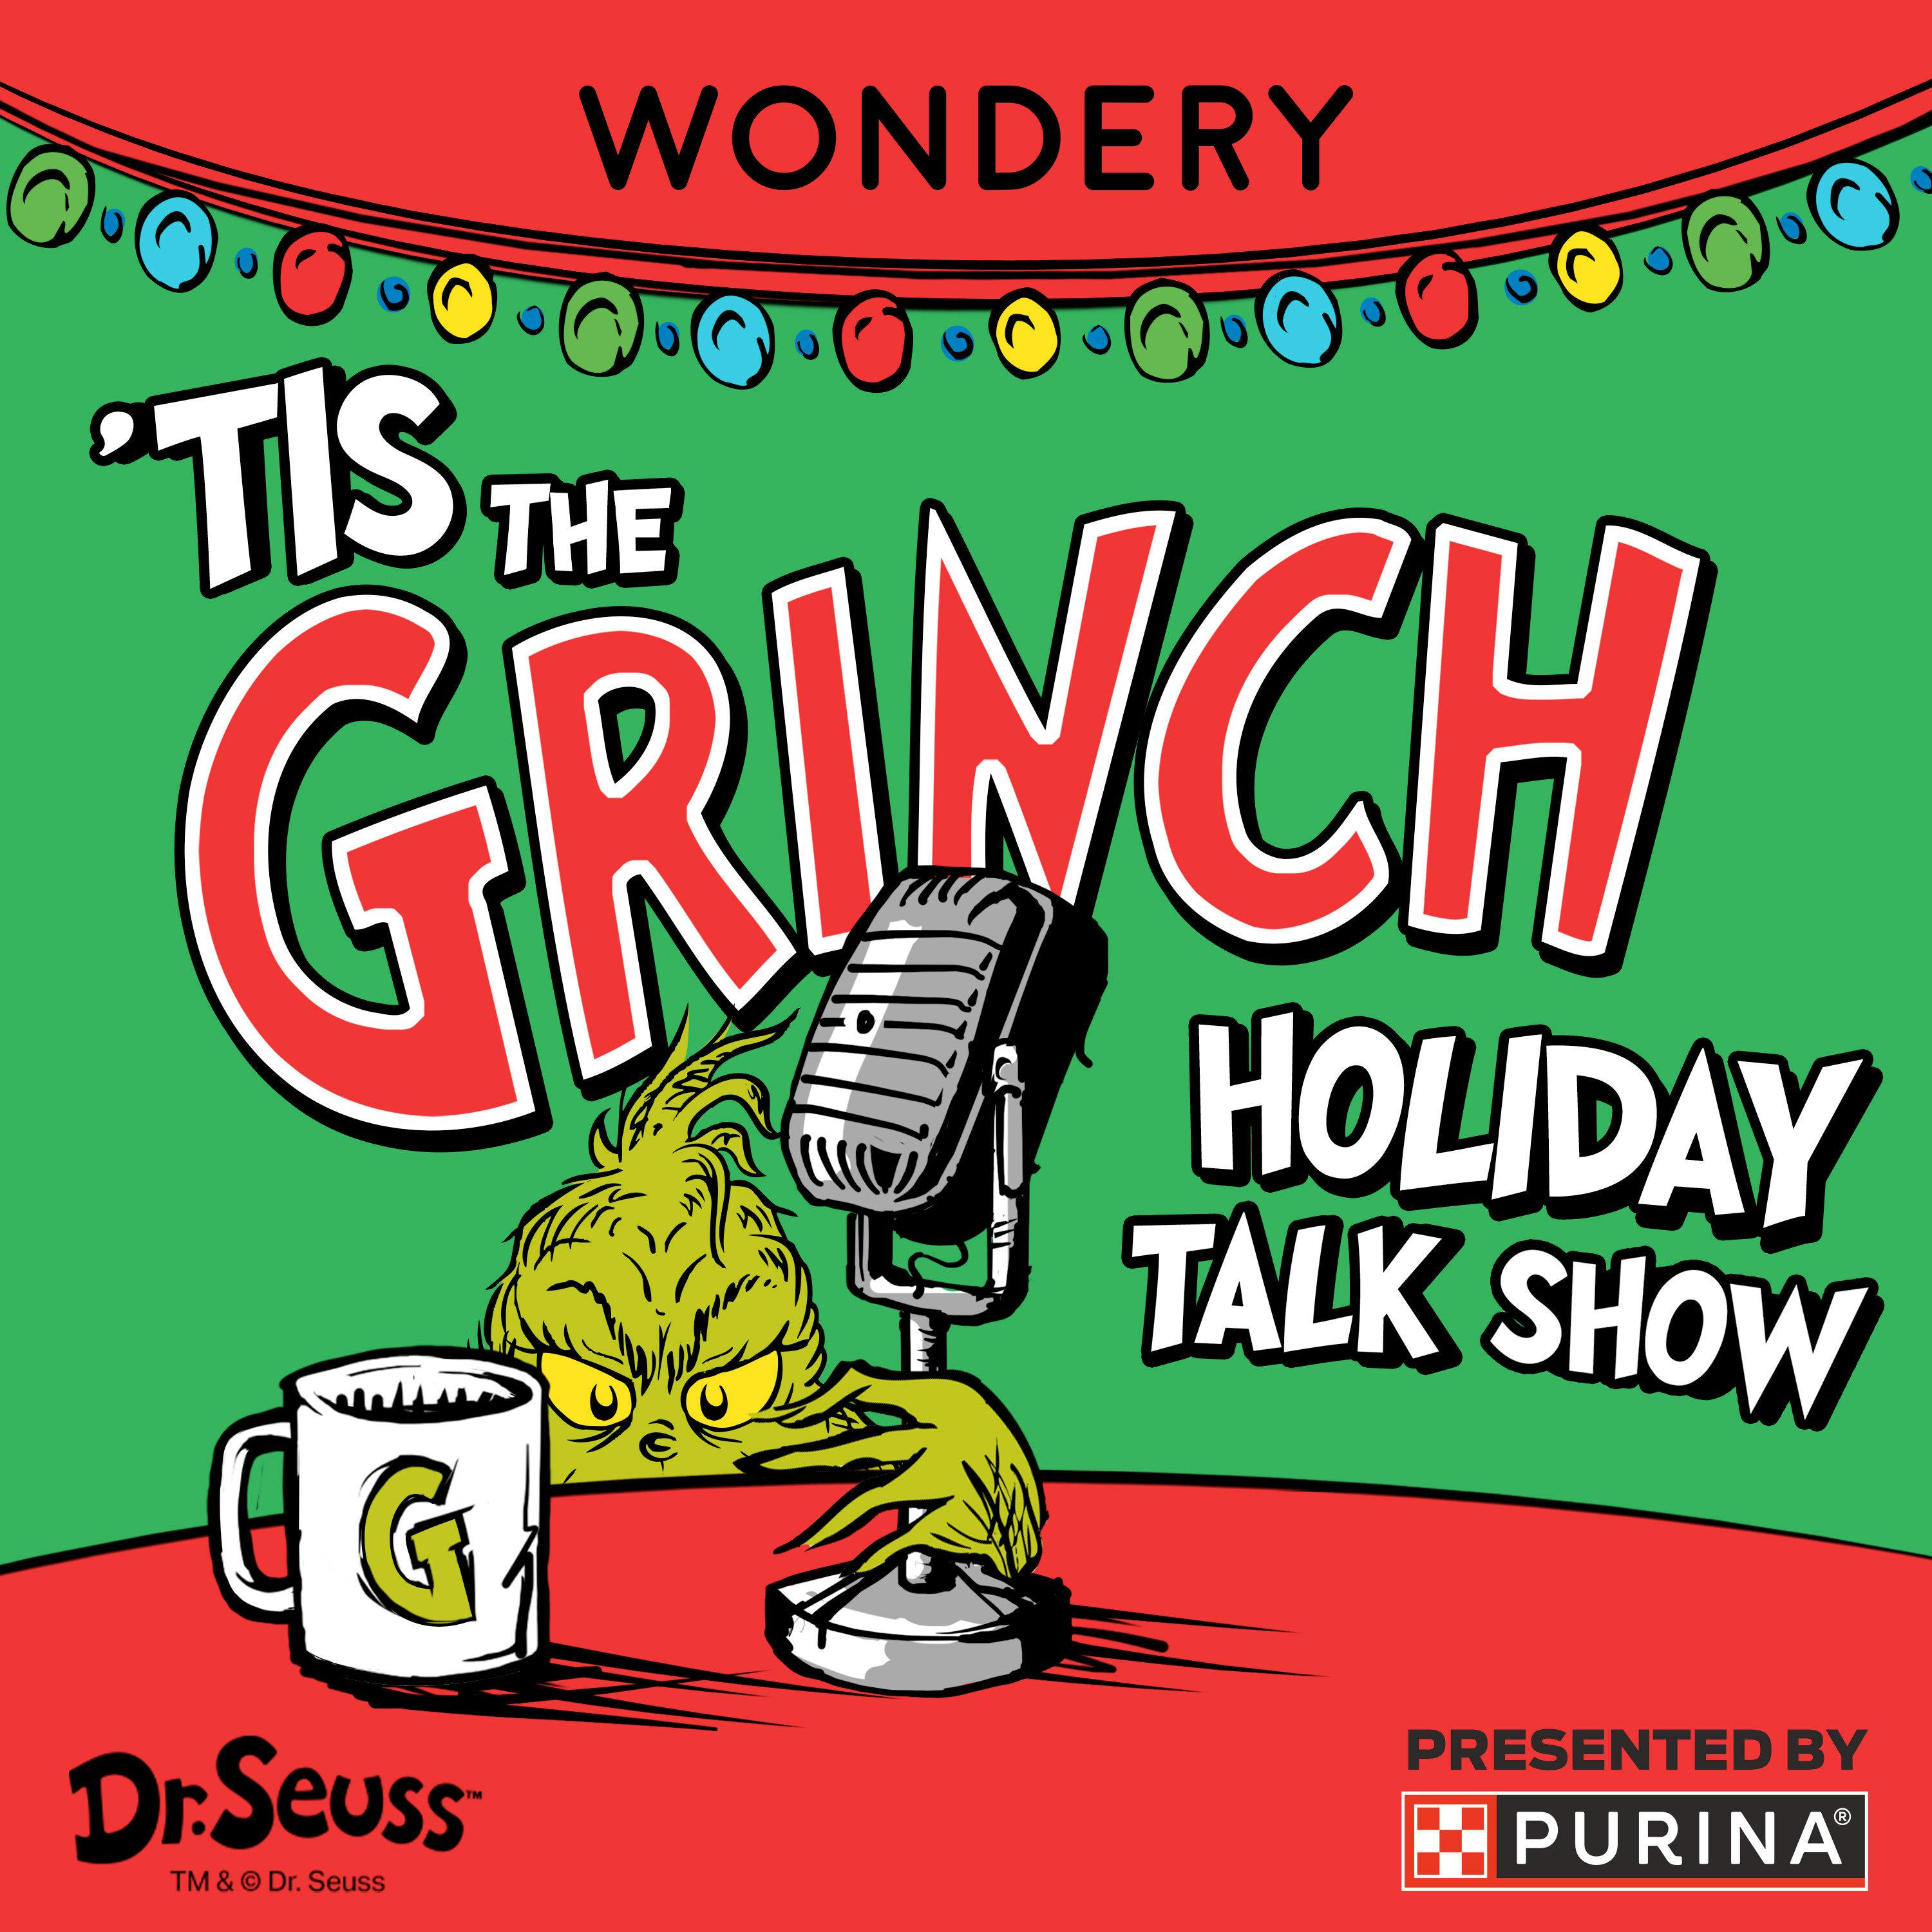 Tis The Grinch Holiday Talk Show